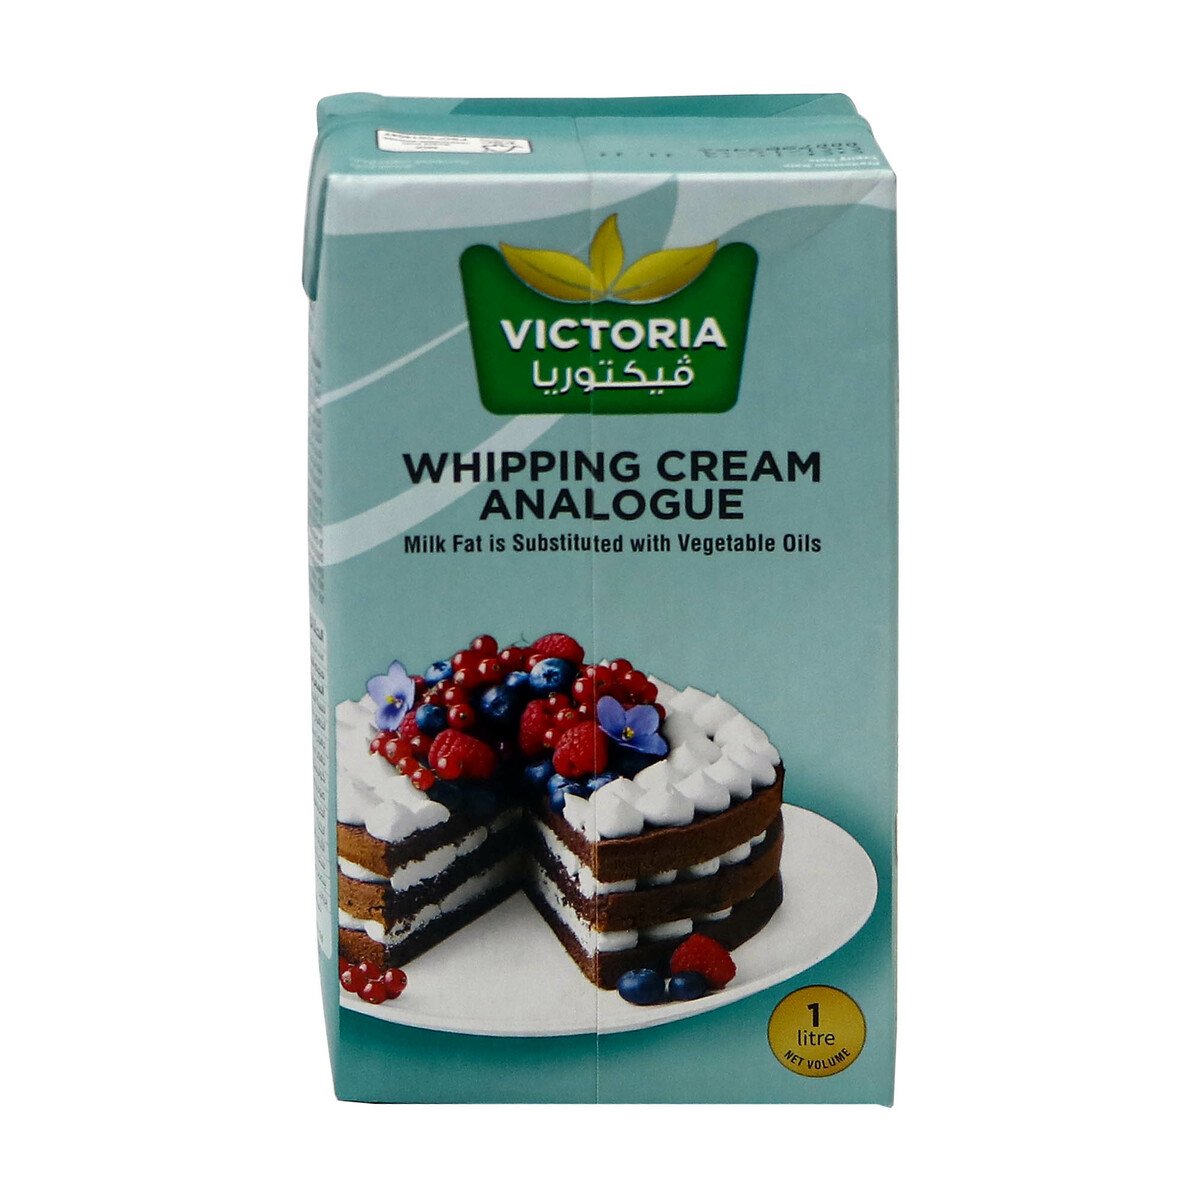 Victoria Whipping Cream Analogue 1Litre